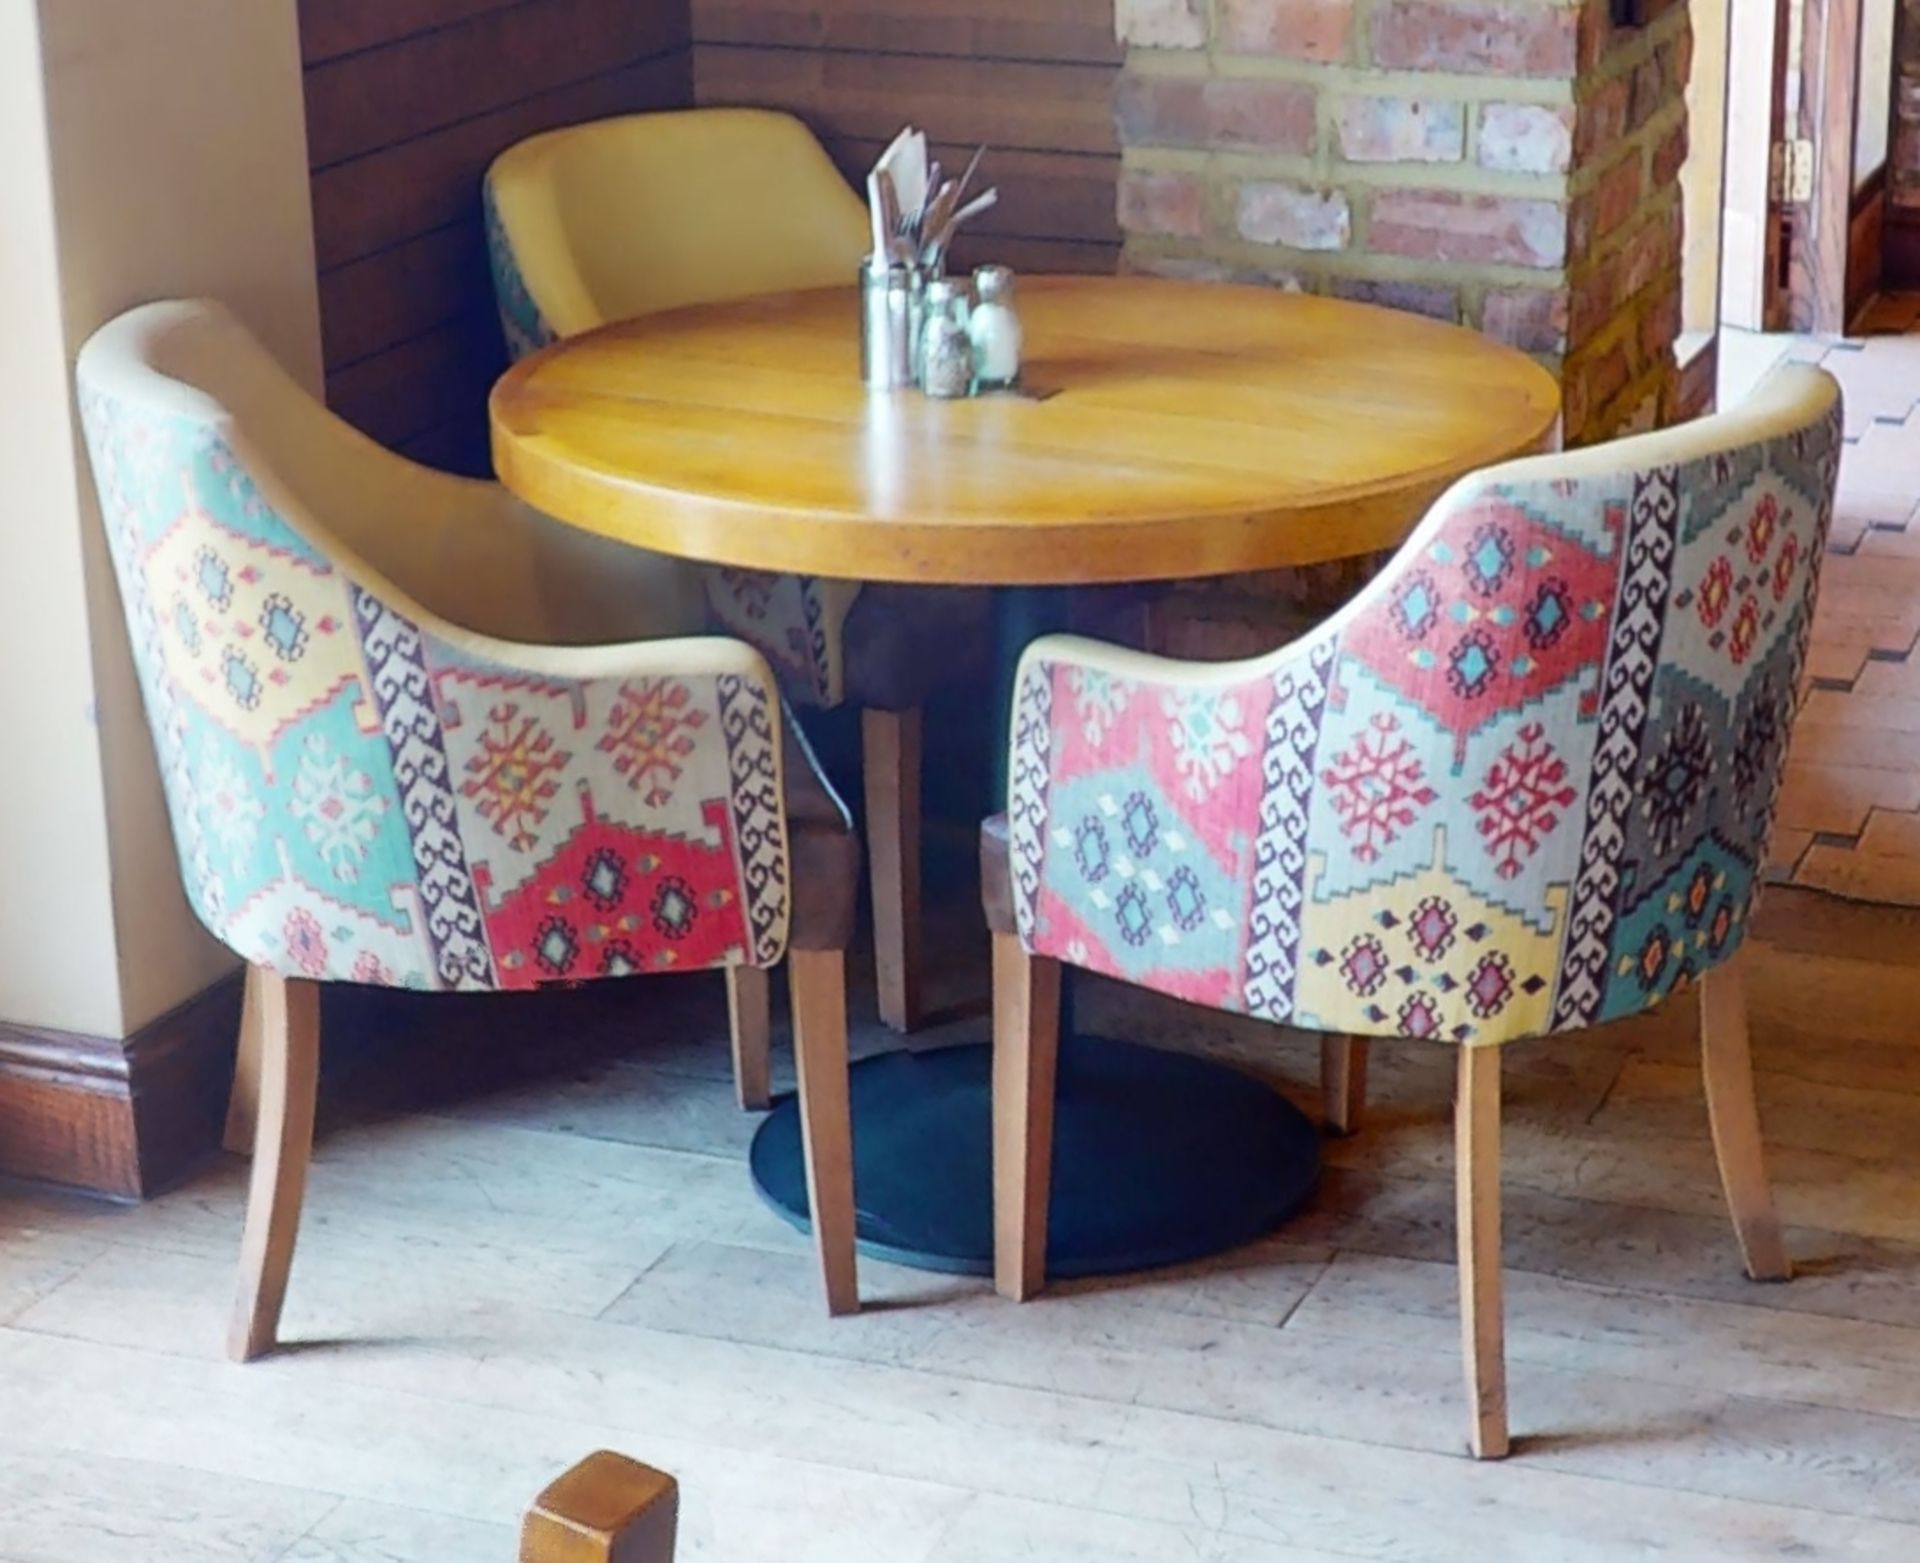 3 x Tub Chairs From Mexican Themed Restaurant - Features Brown & Yellow Faux Leather Upholstery With - Image 3 of 4